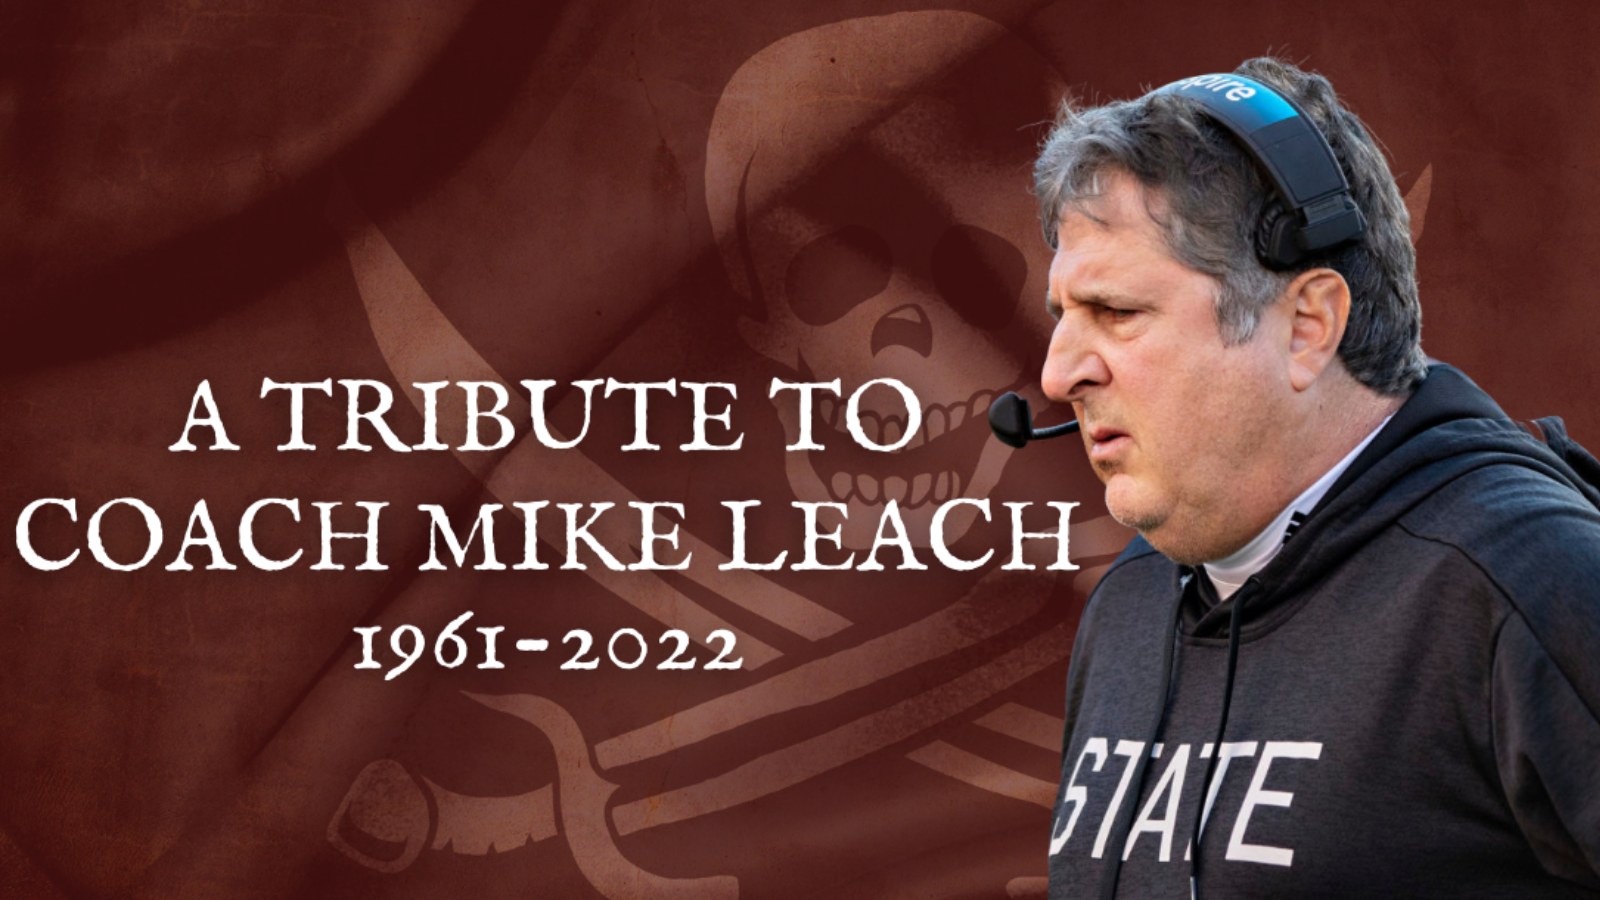 A Tribute to Mike Leach